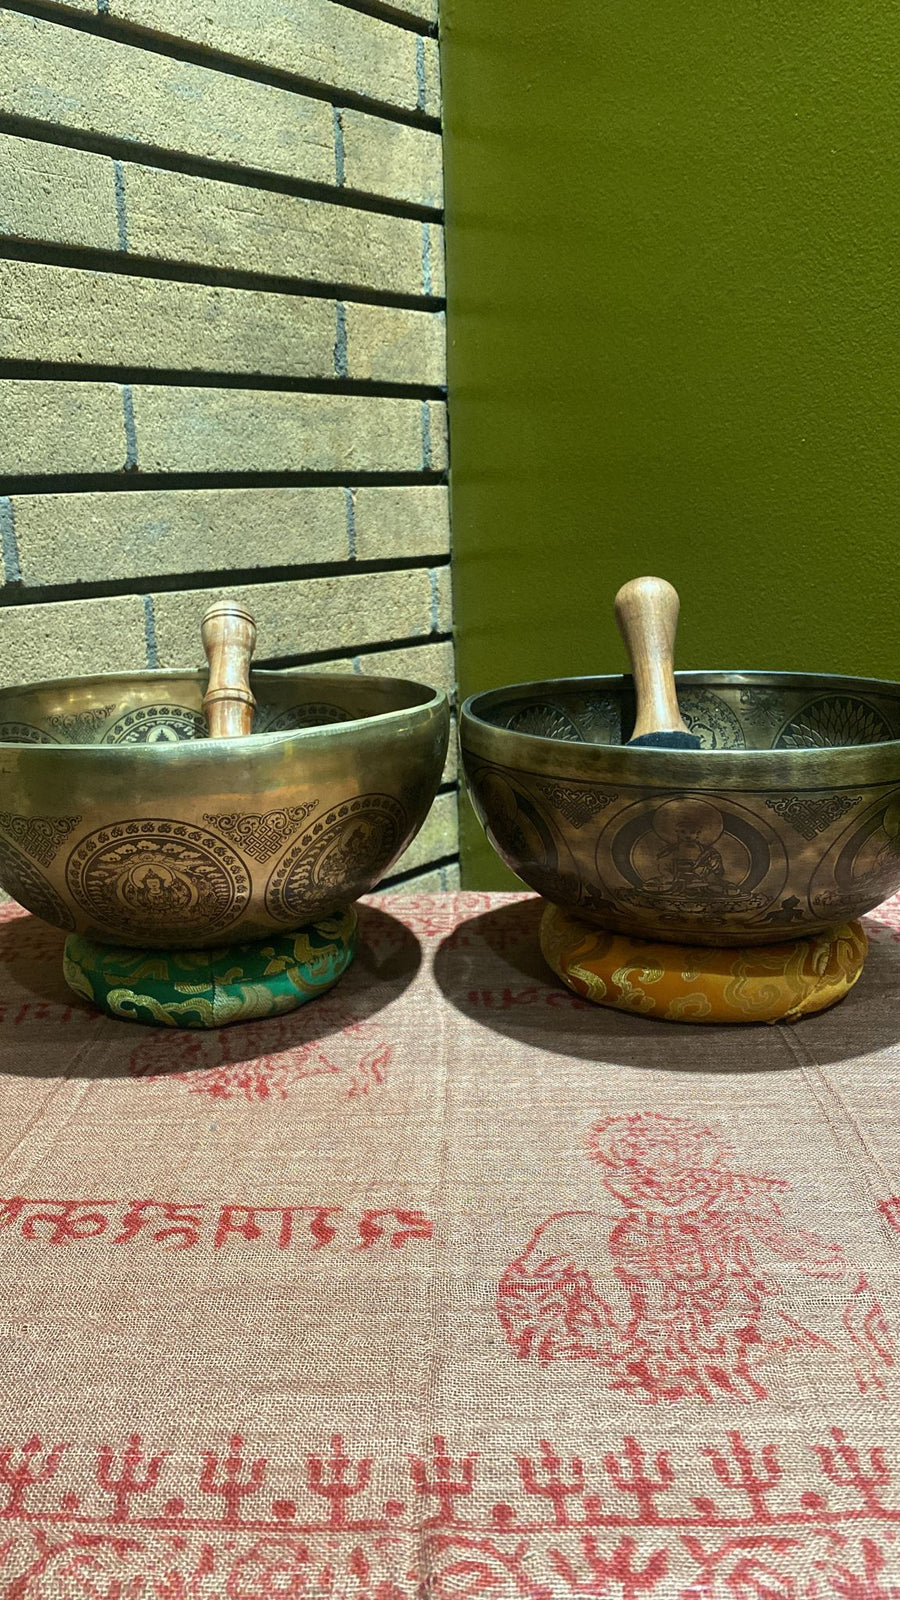 Tibetan Bowls for Anxiety